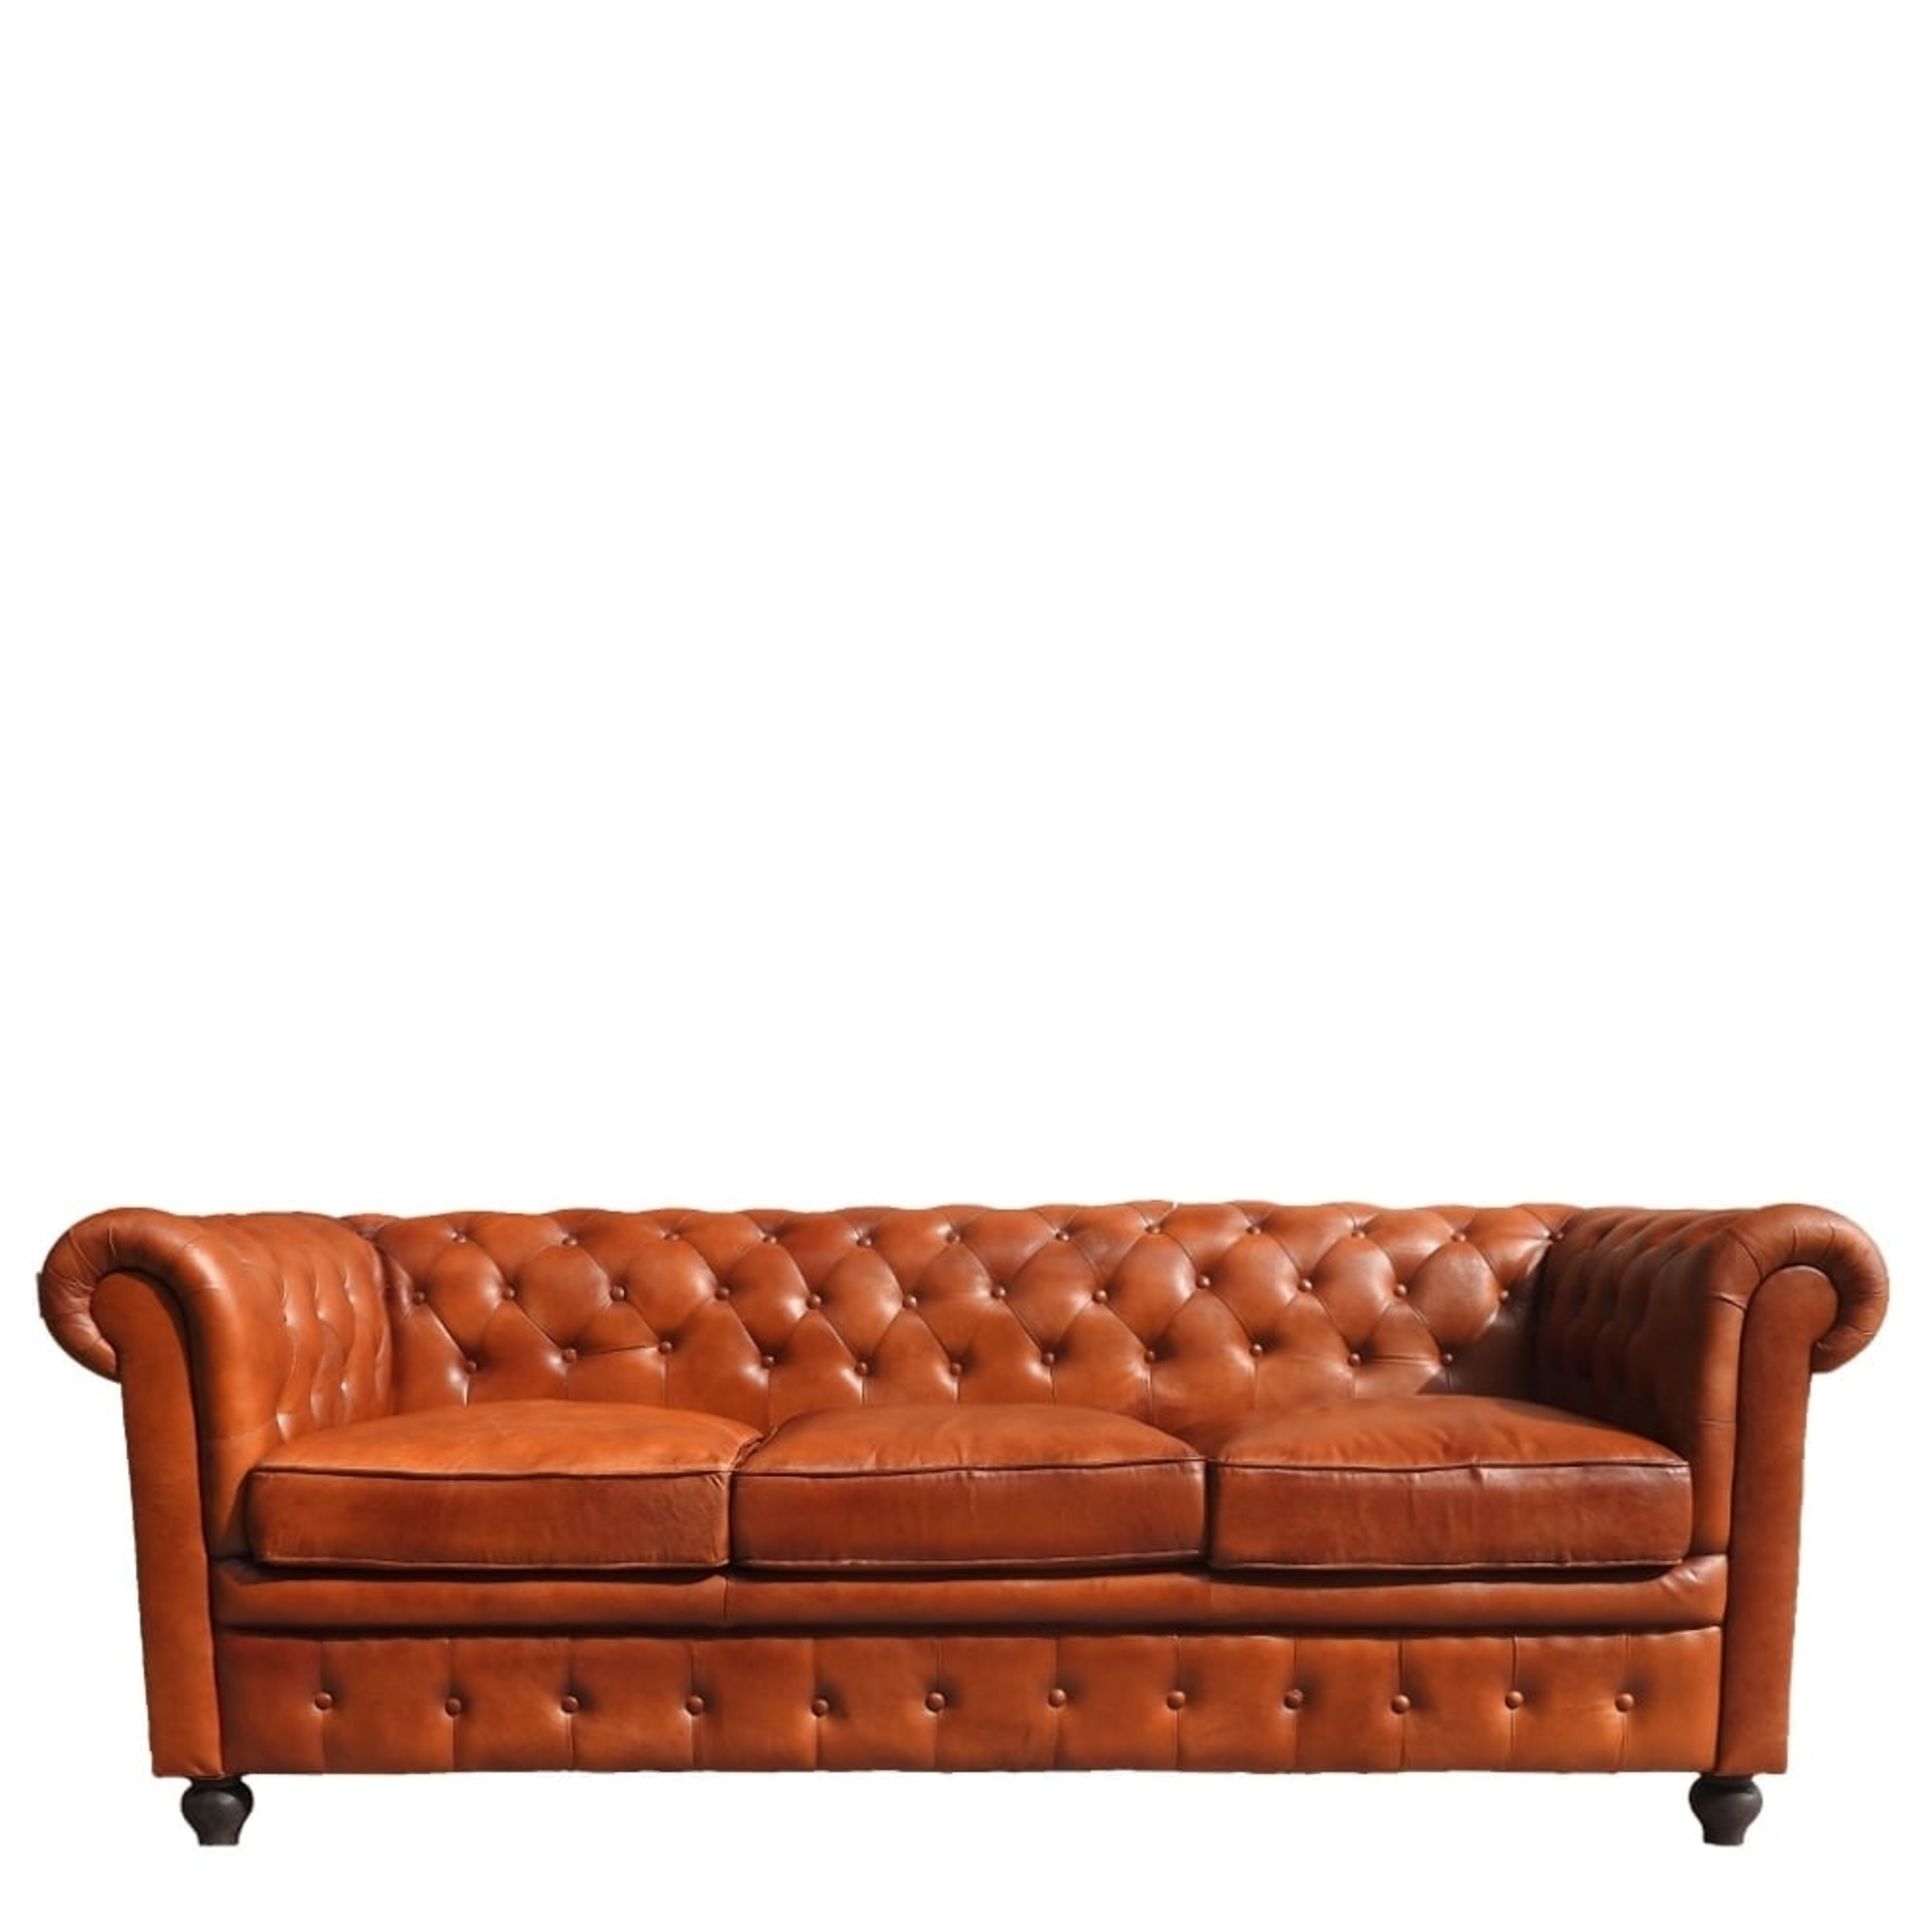 Shoreditch Leather Chesterfield 3-Seater Sofa Handmade - Image 2 of 3